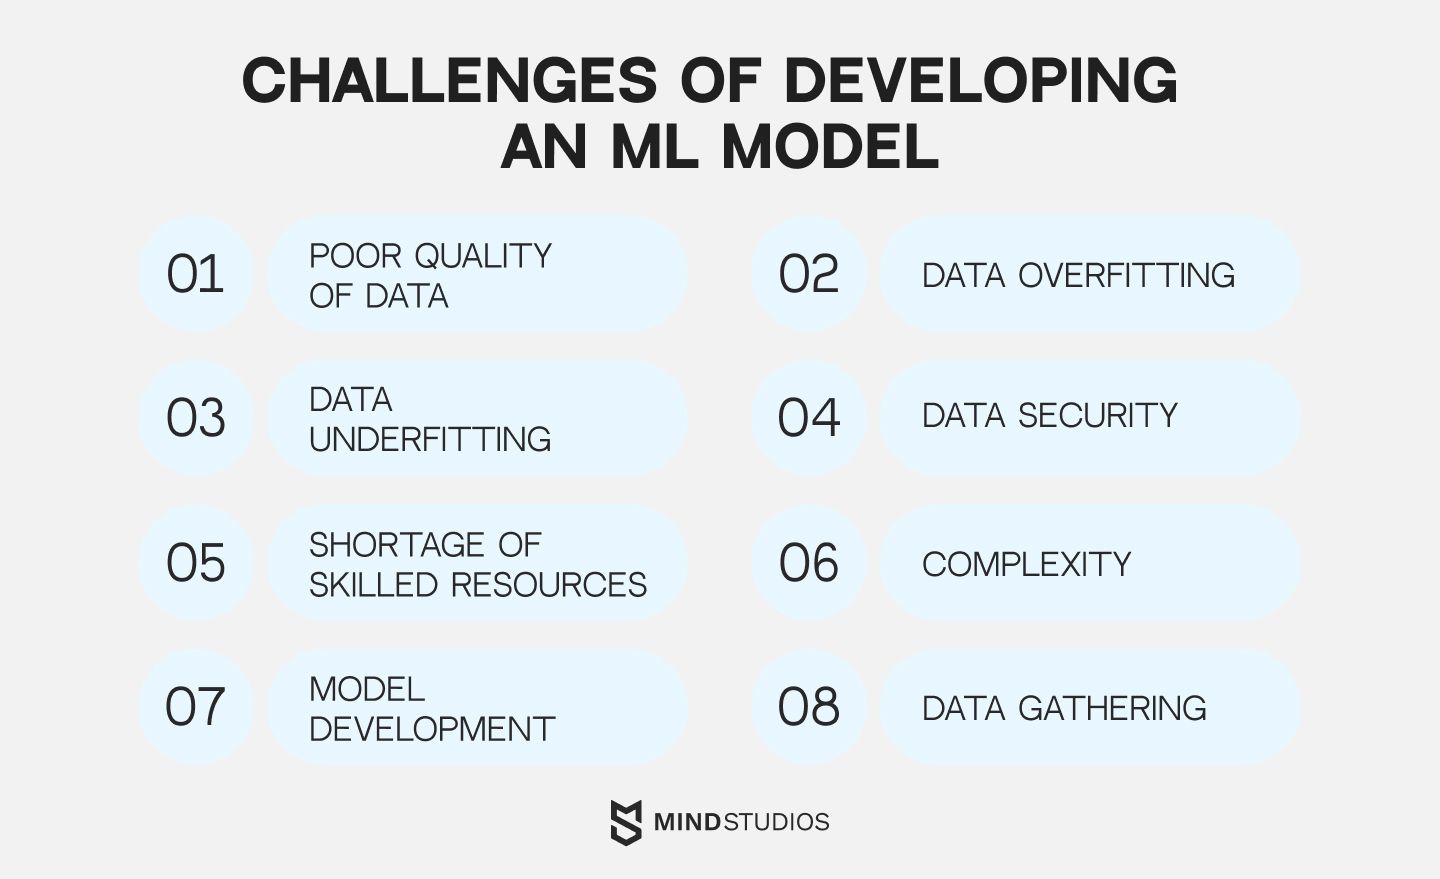 Challenges of developing an ML model